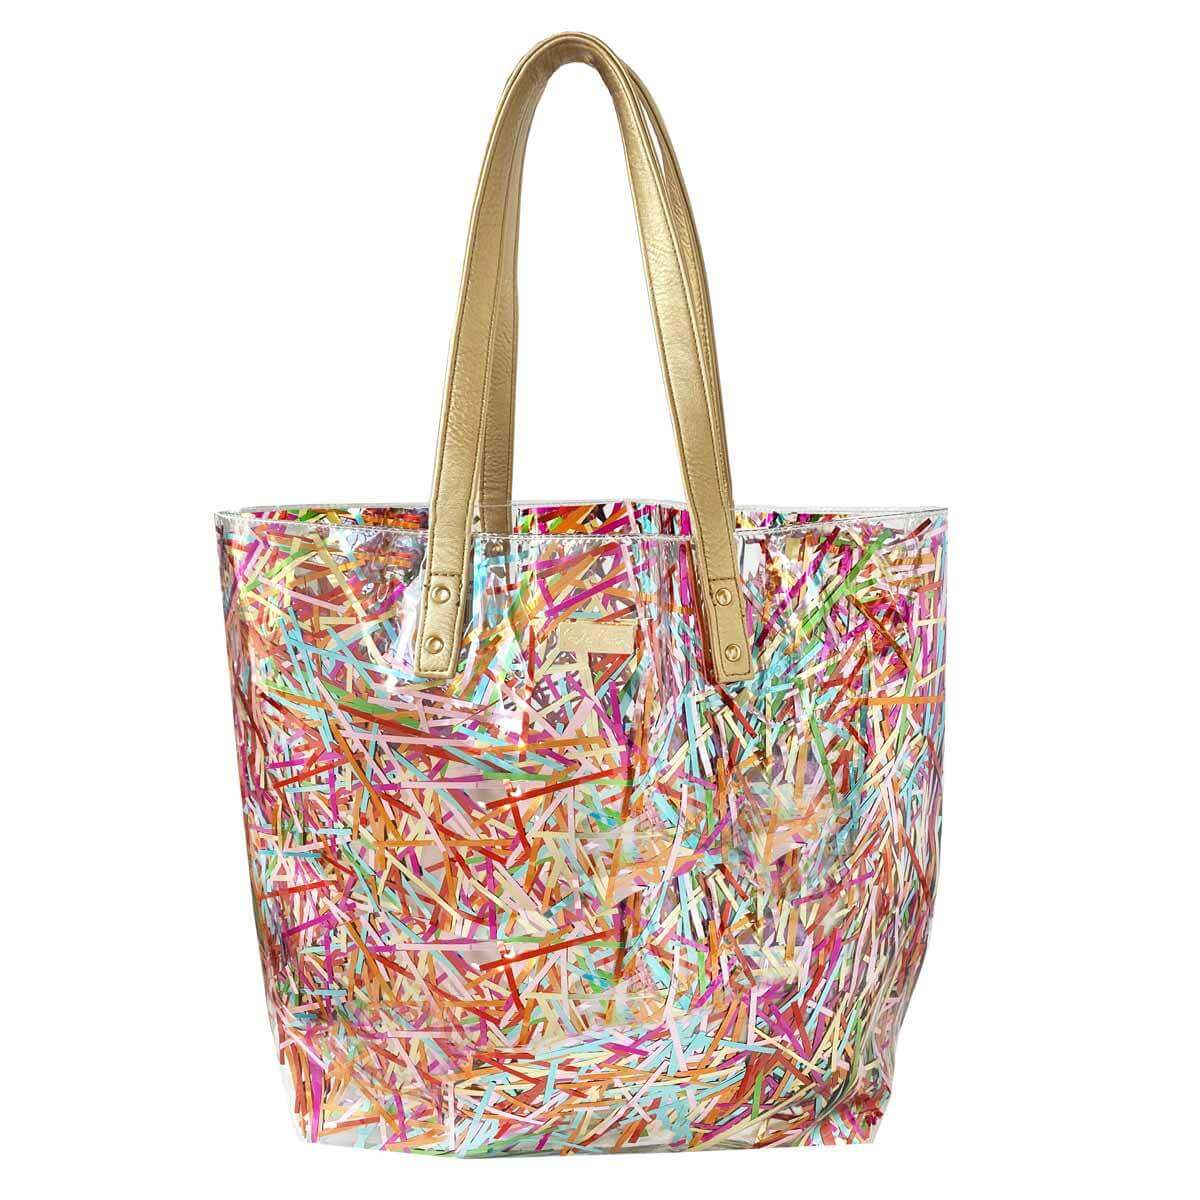 Clear vinyl bag filled with multicolored tinsel streamers from Packed Party for sale at Just Peachy